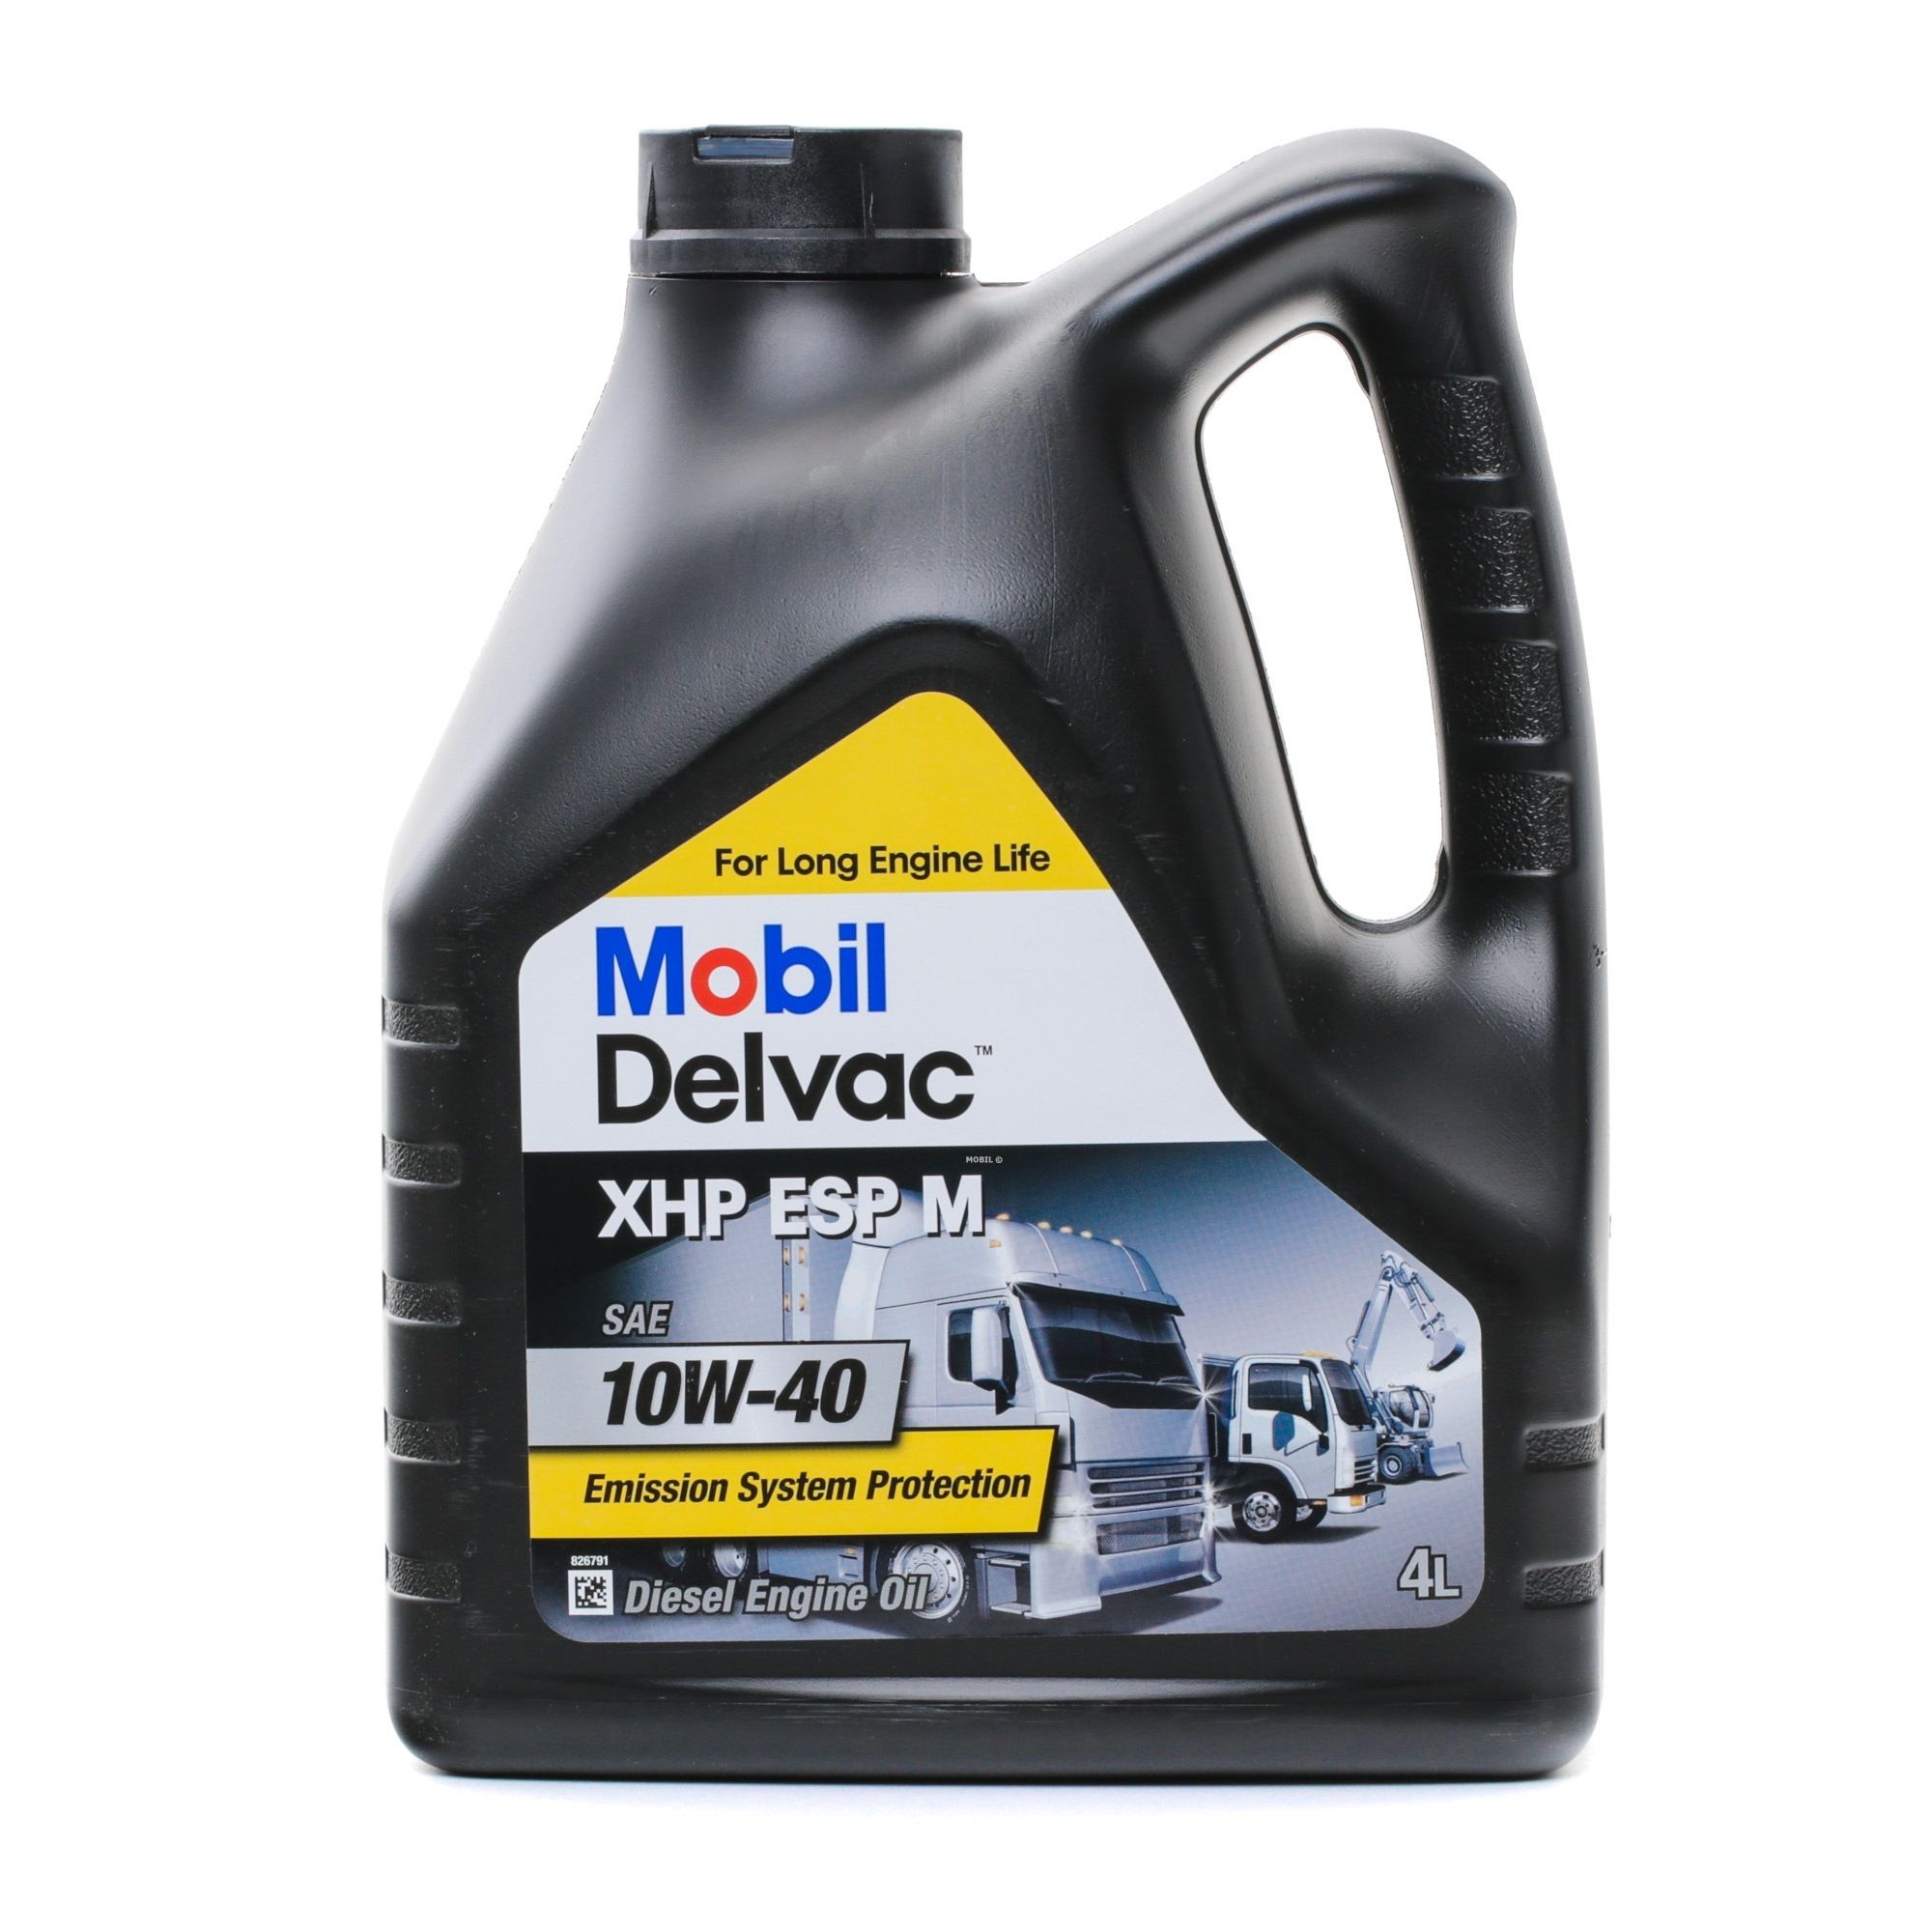 MOBIL 153122 Engine oil cheap in online store